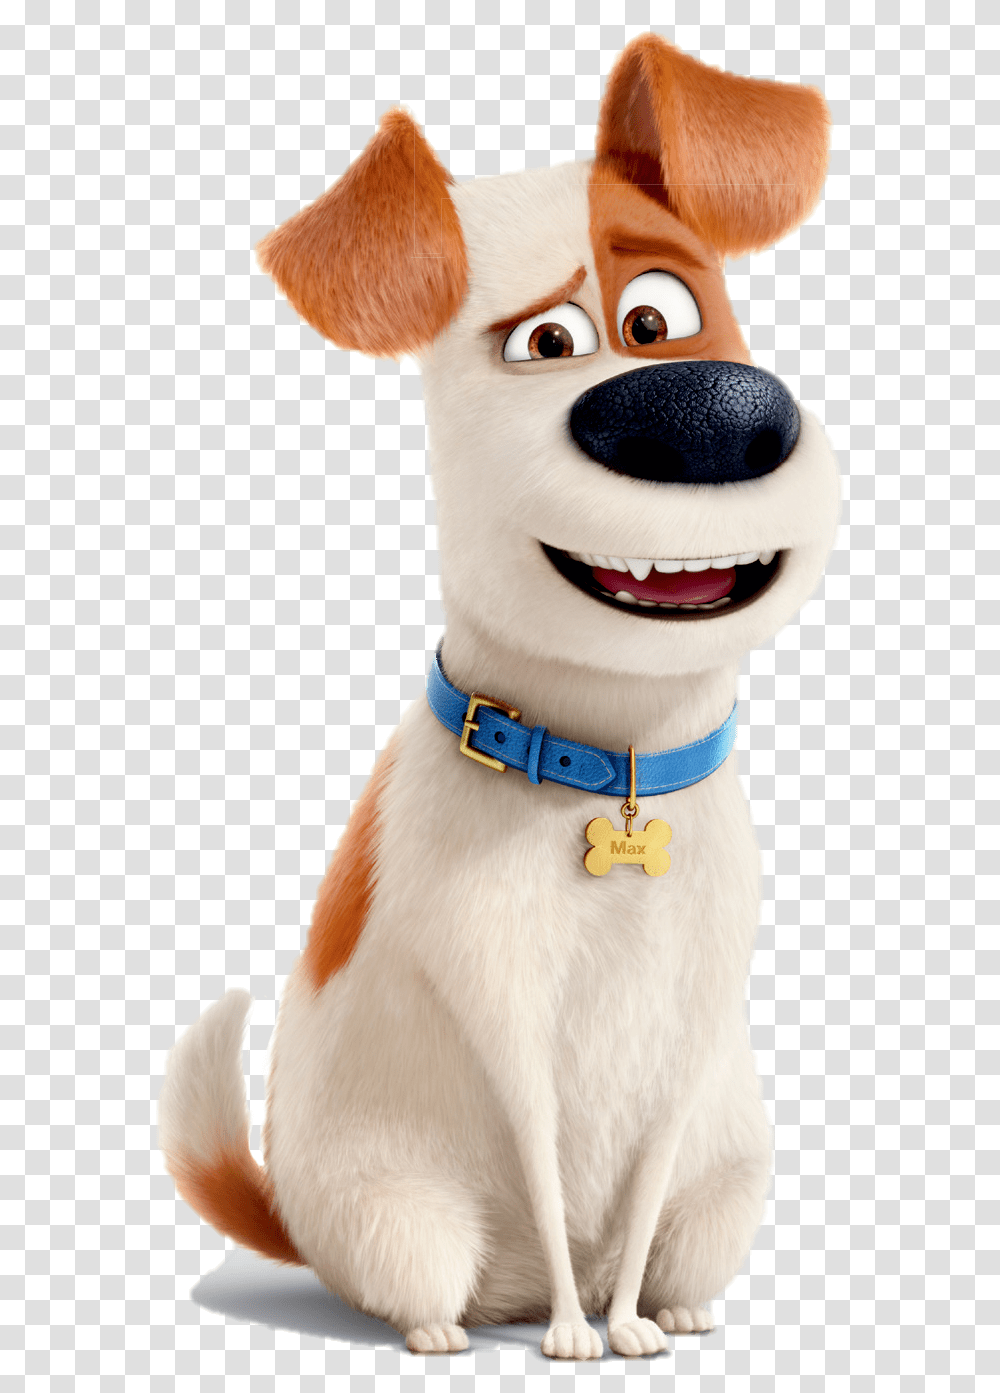 Dog Image Max From Secret Life Of Pets, Canine, Animal, Mammal, Accessories Transparent Png